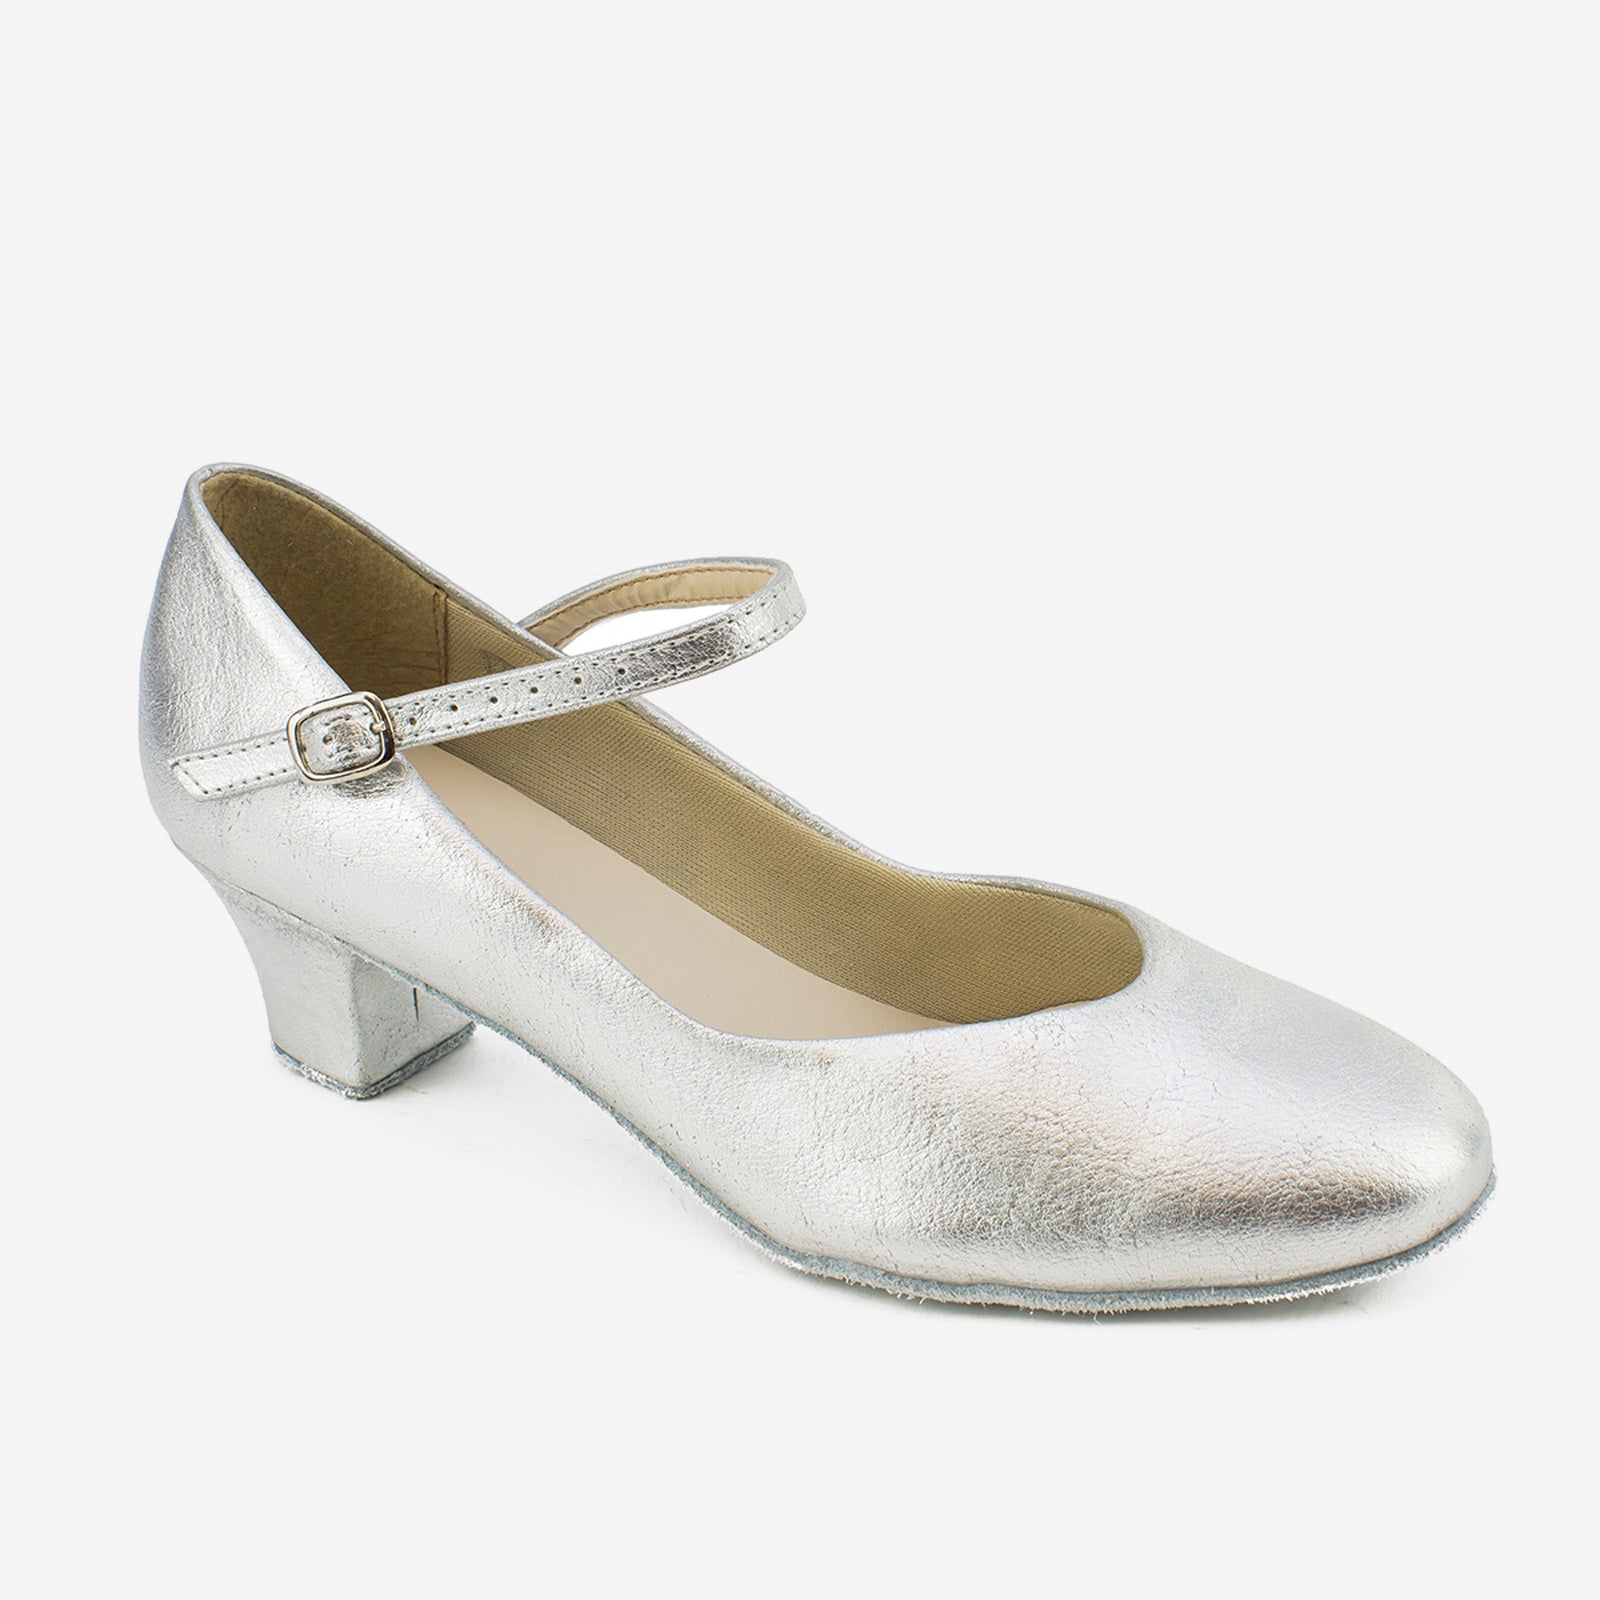 The lowest heel in the series of ballroom shoes based on So Danca's top ...